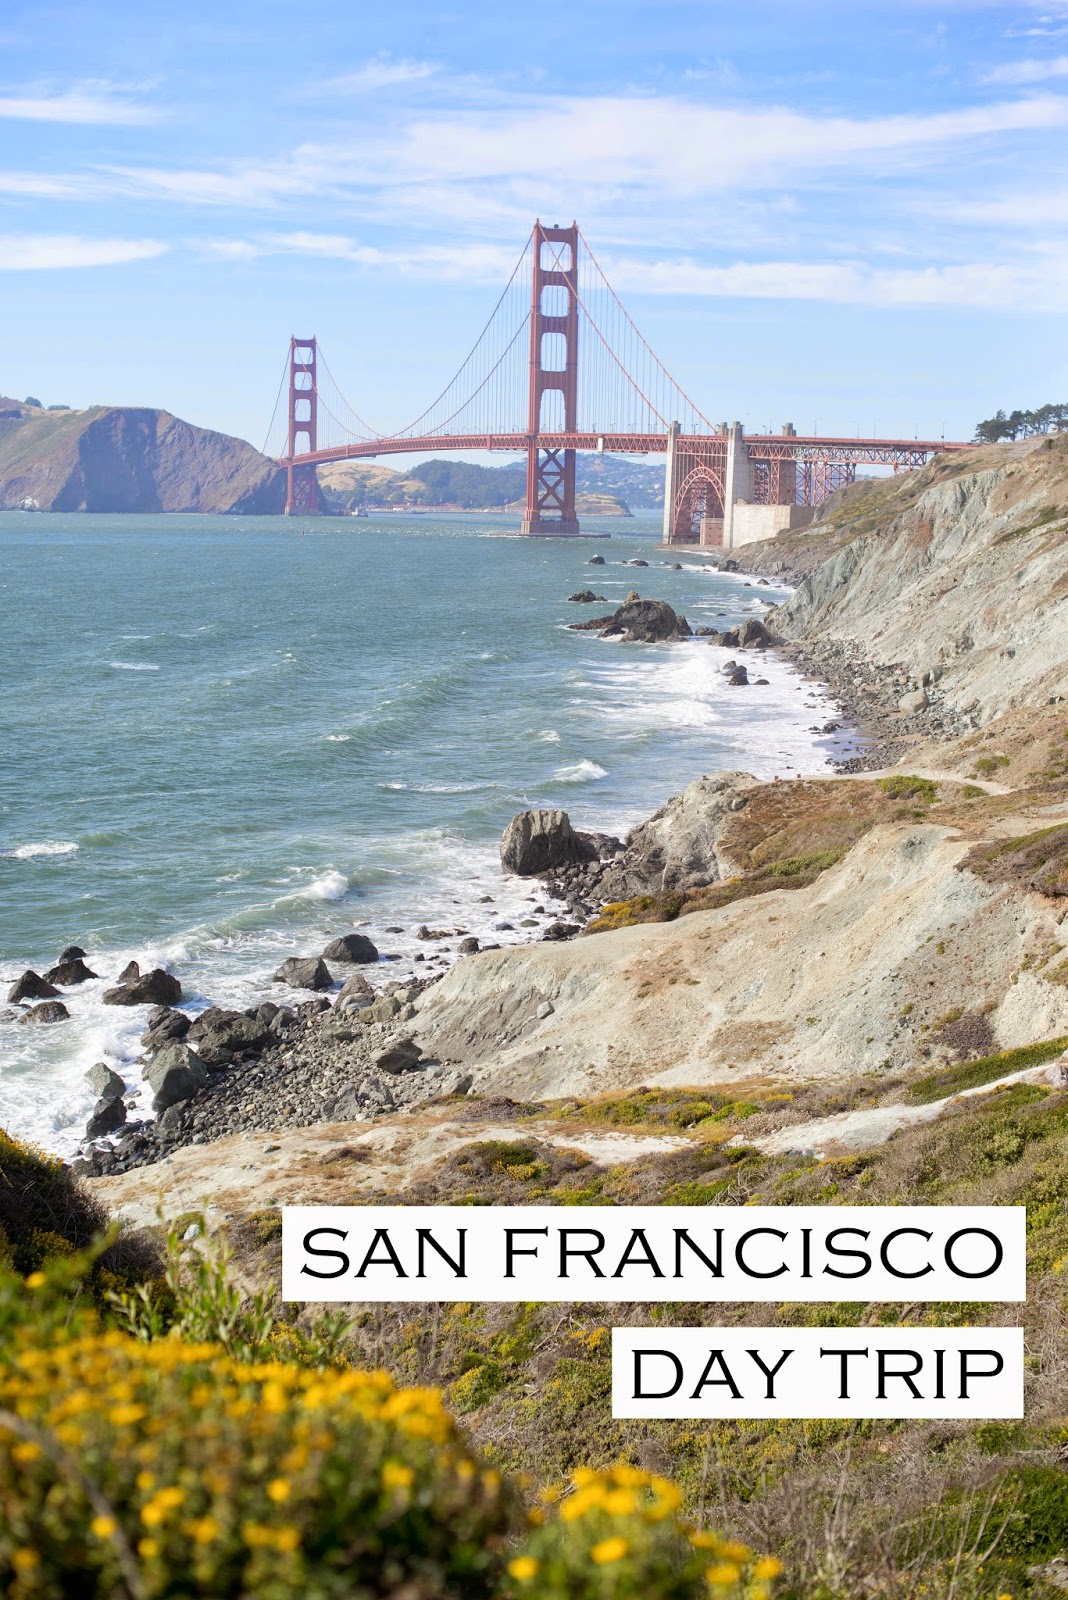 San Francisco Day Trip: Places to go off the beaten path